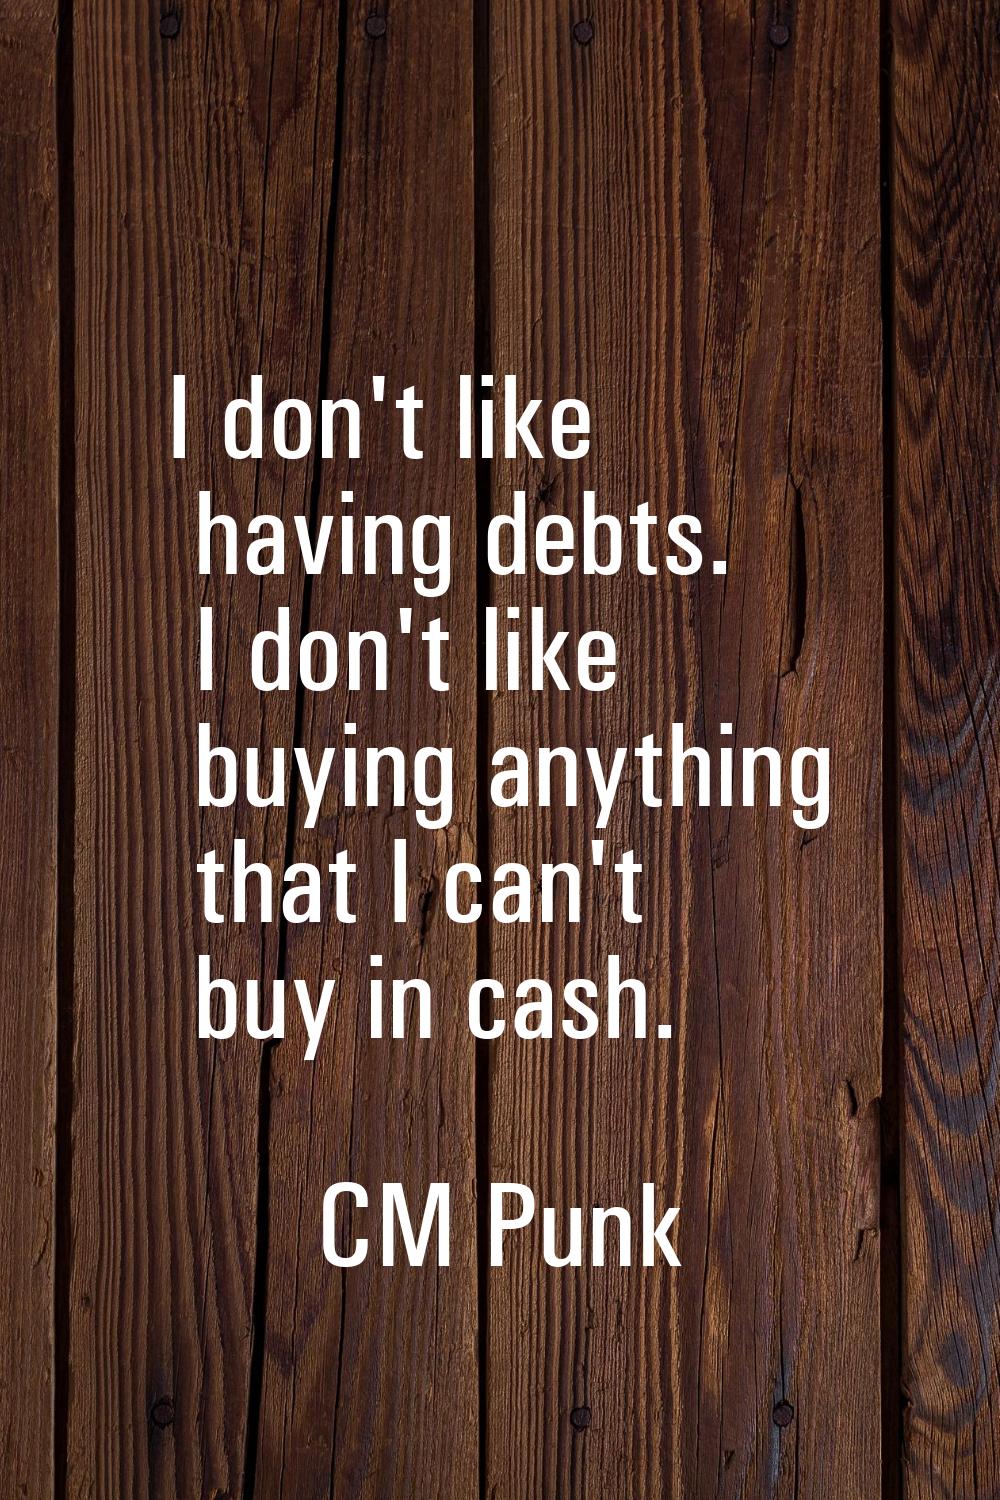 I don't like having debts. I don't like buying anything that I can't buy in cash.